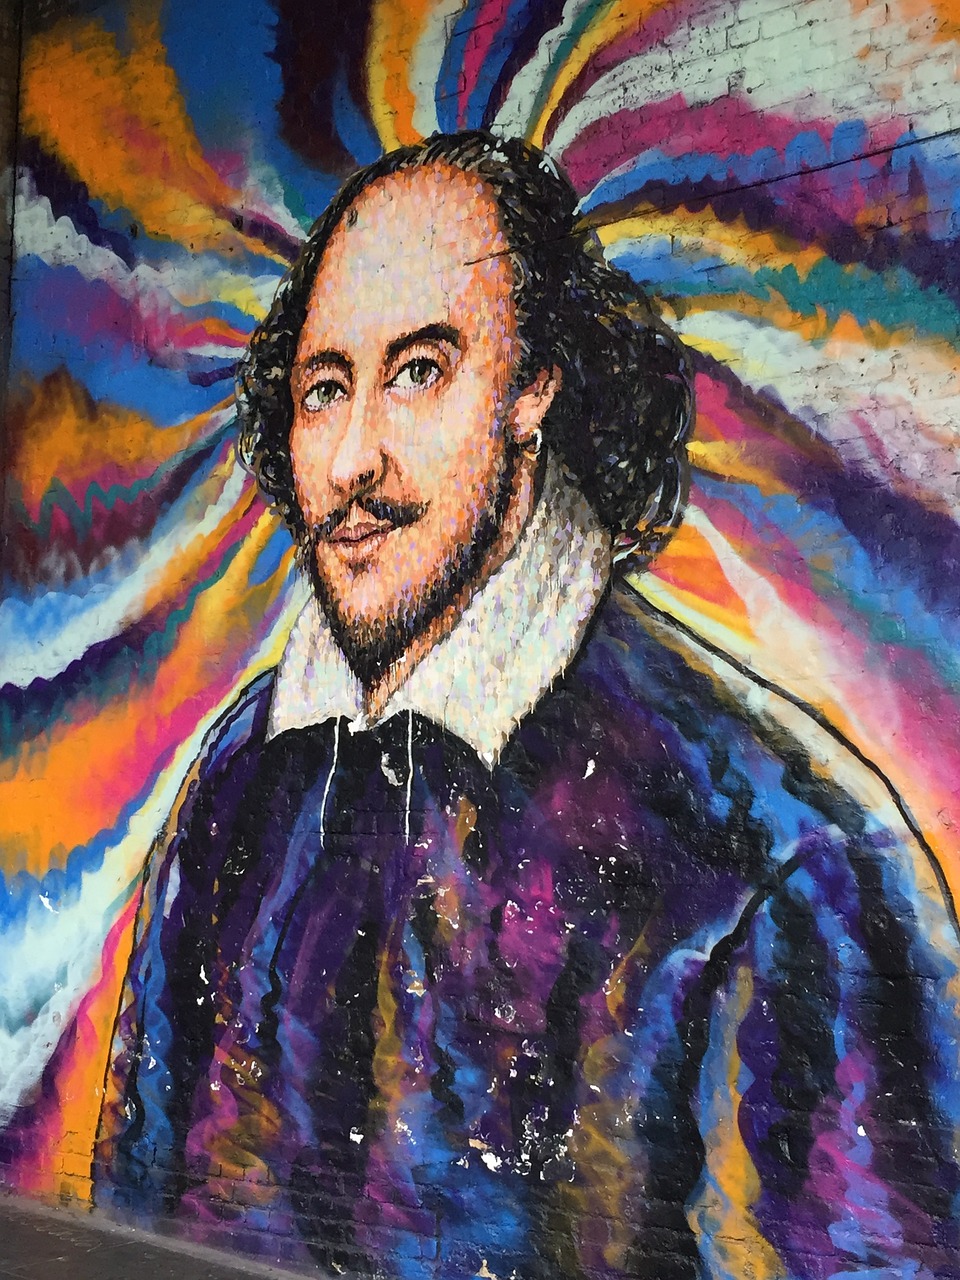 Unraveling Shakespeare’s Timeless Wisdom: “Some Are Born Great, Some Achieve Greatness, and Some Have Greatness Thrust Upon Them.”